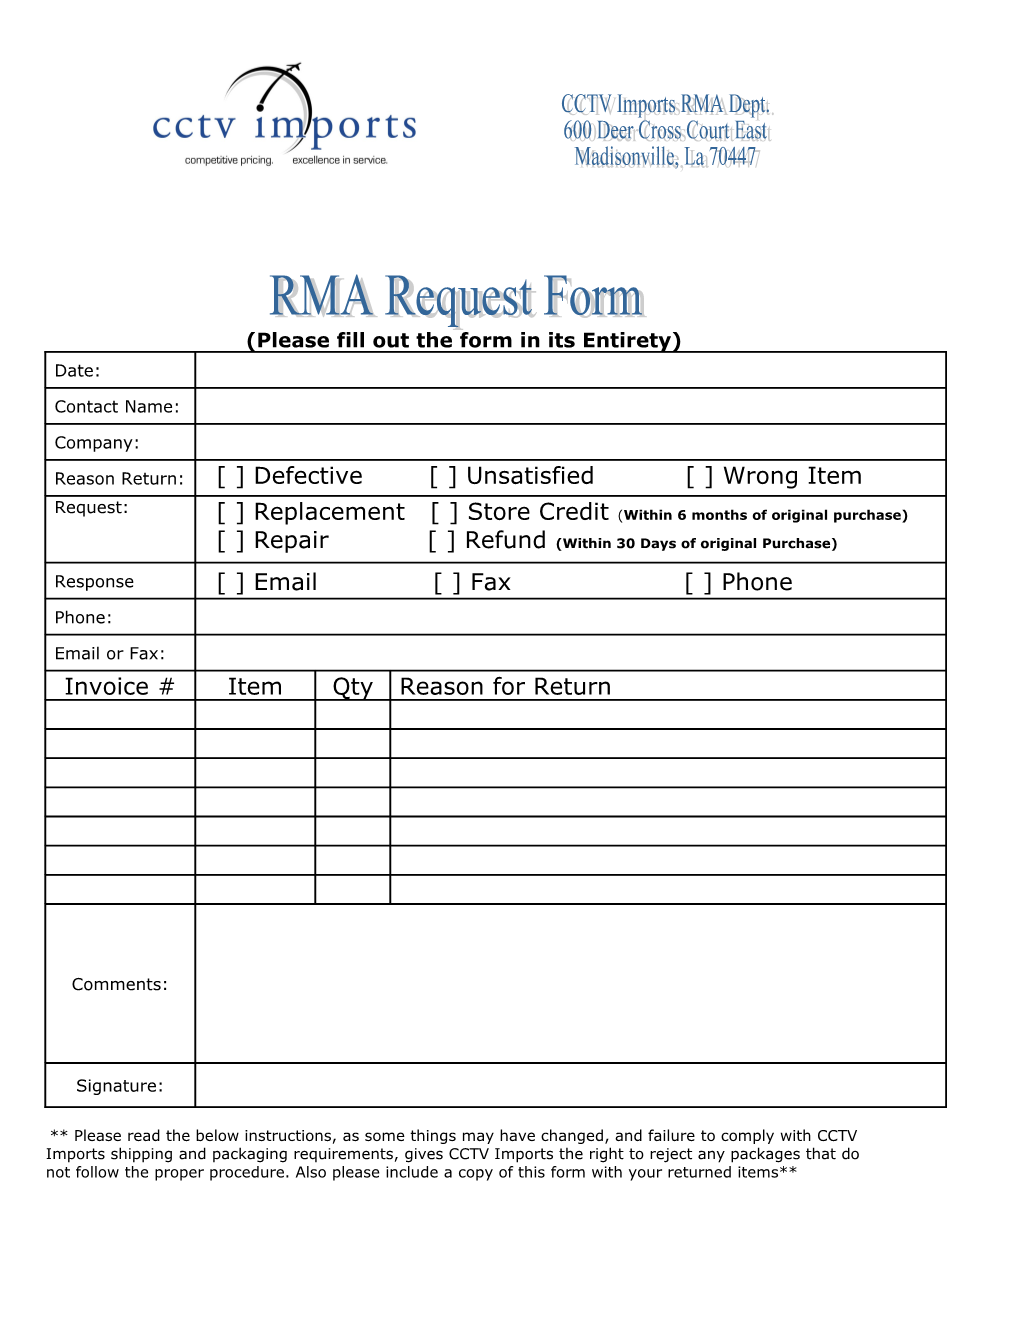 RMA Request Form s1